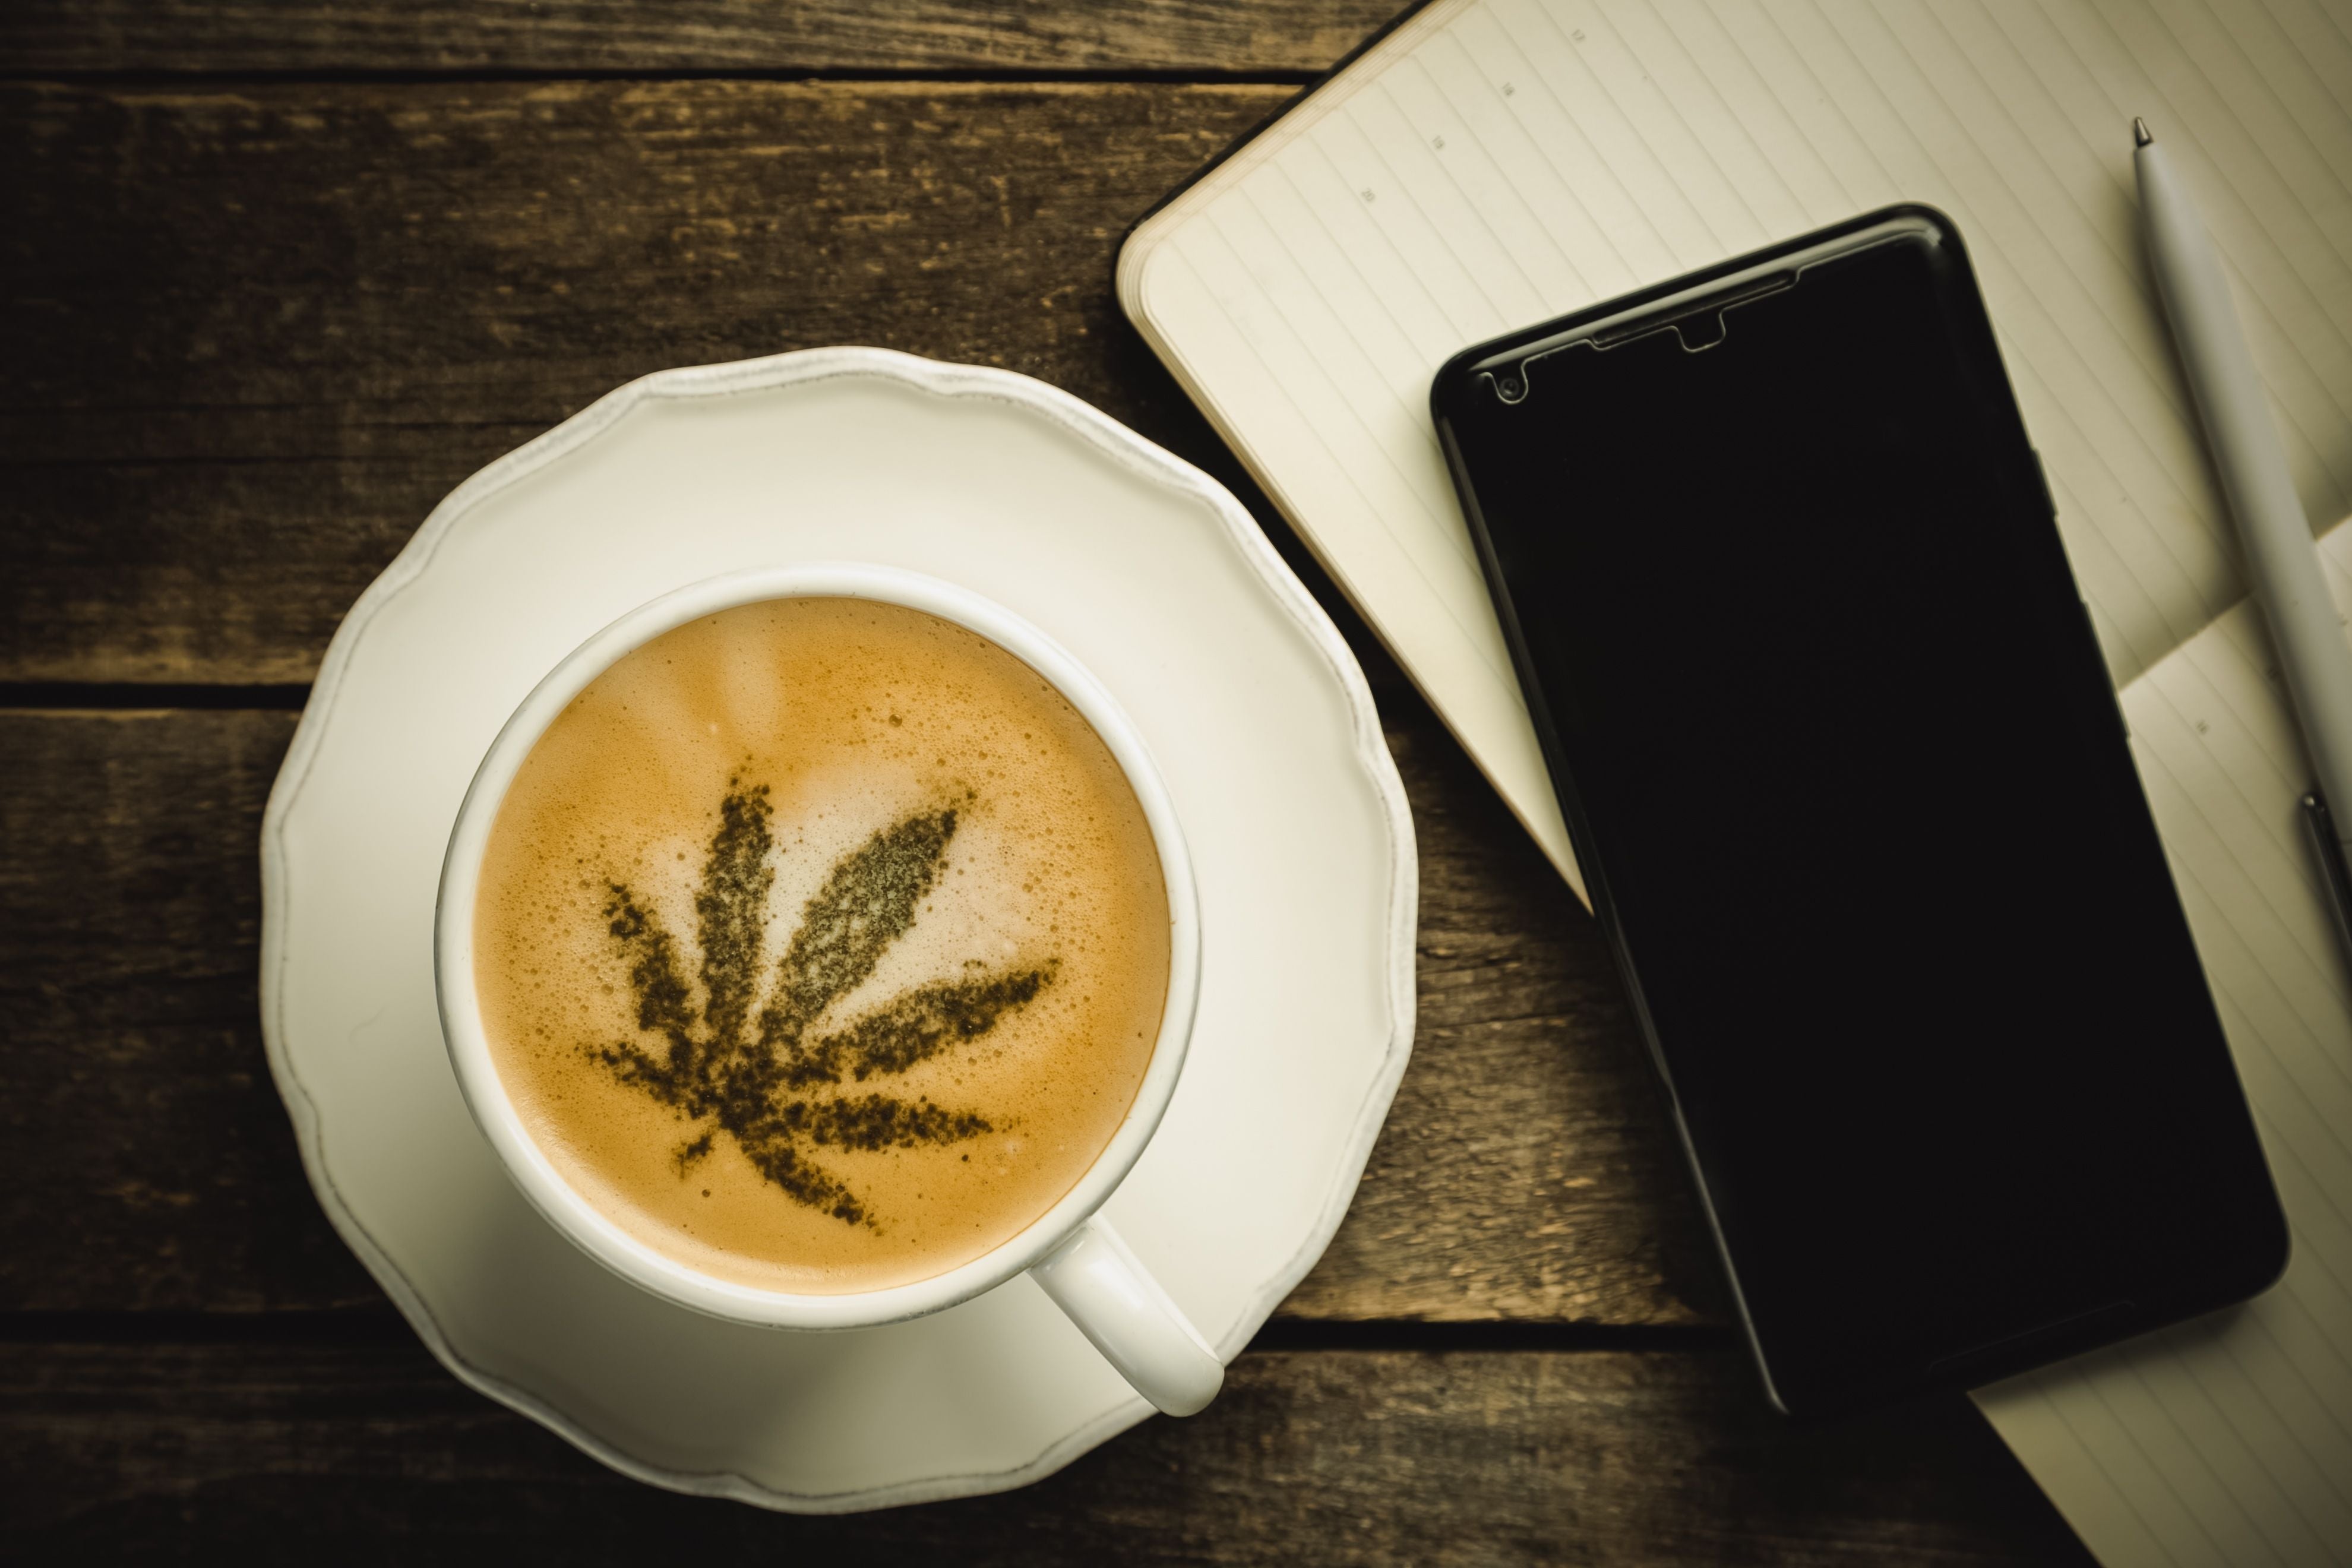 CBD products must be spot-on to make a splash in the coffee market